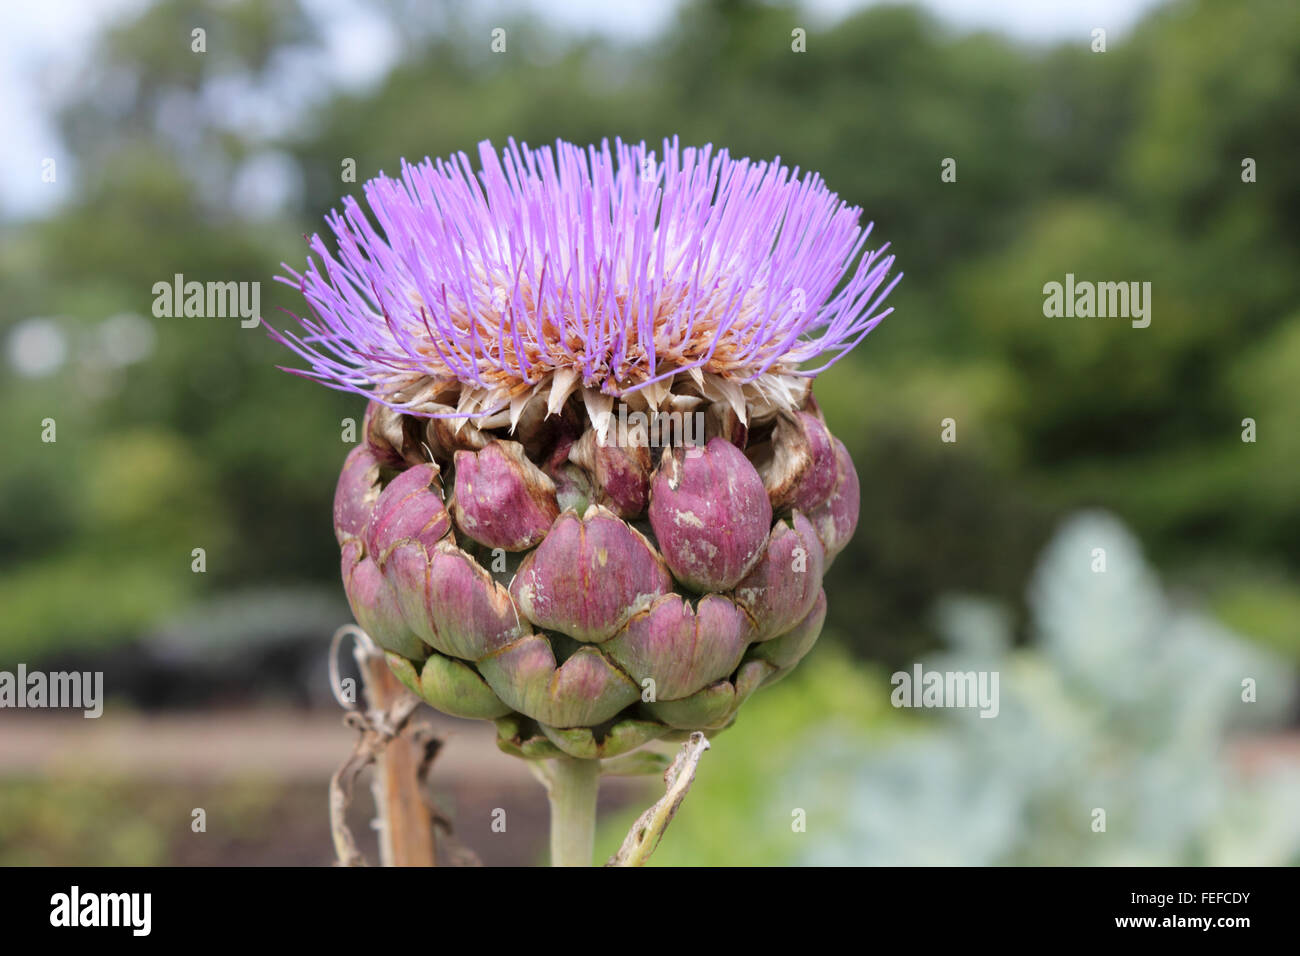 Seen here in flower, the globe artichoke (Cynara cardunculus var. scolymus) is a variety of edible thistle. Surrey, England, UK. Stock Photo